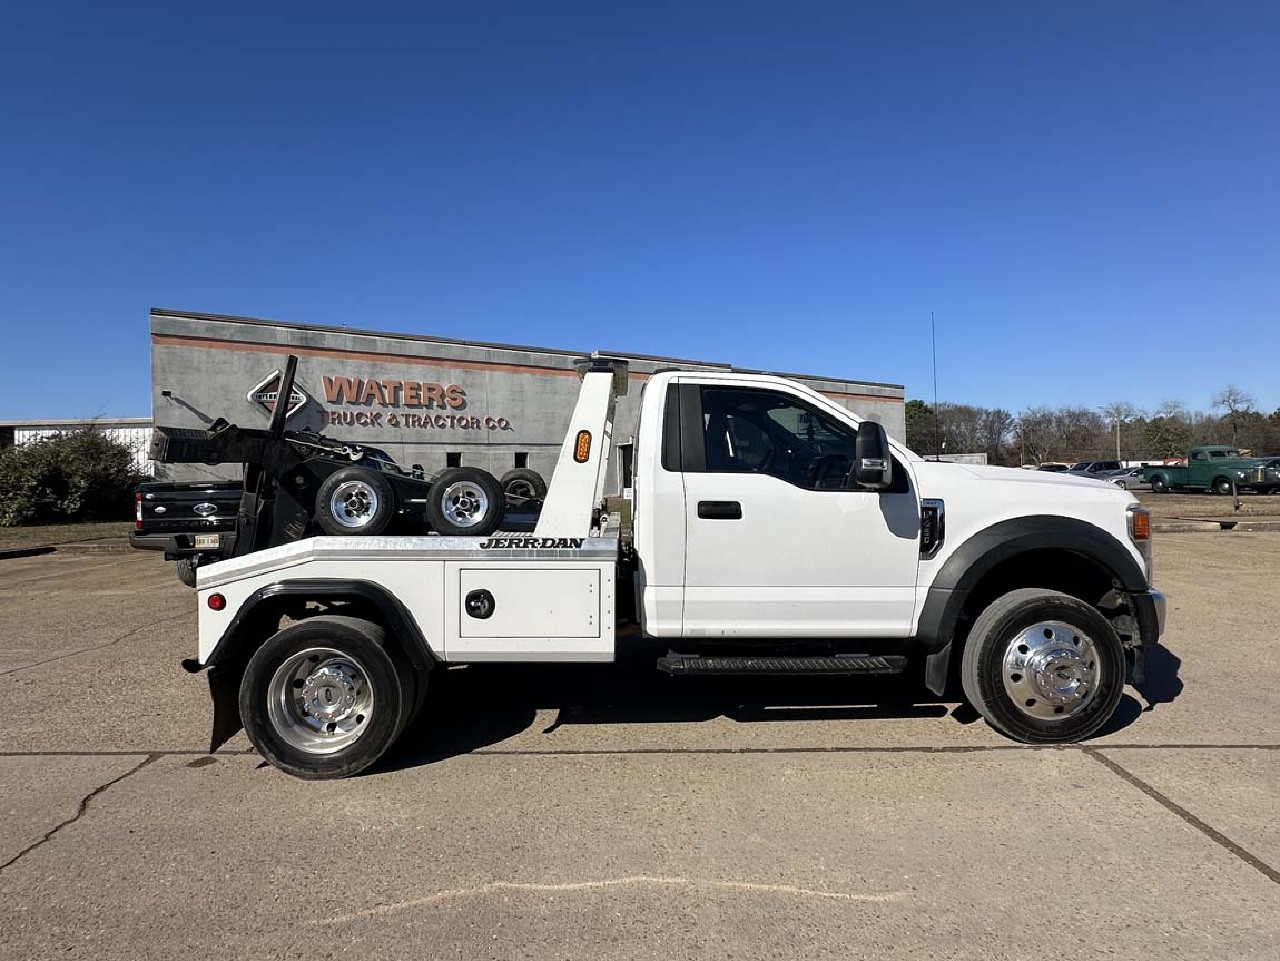 USED 2020 FORD F-450 WRECKER TOW TRUCK #3151